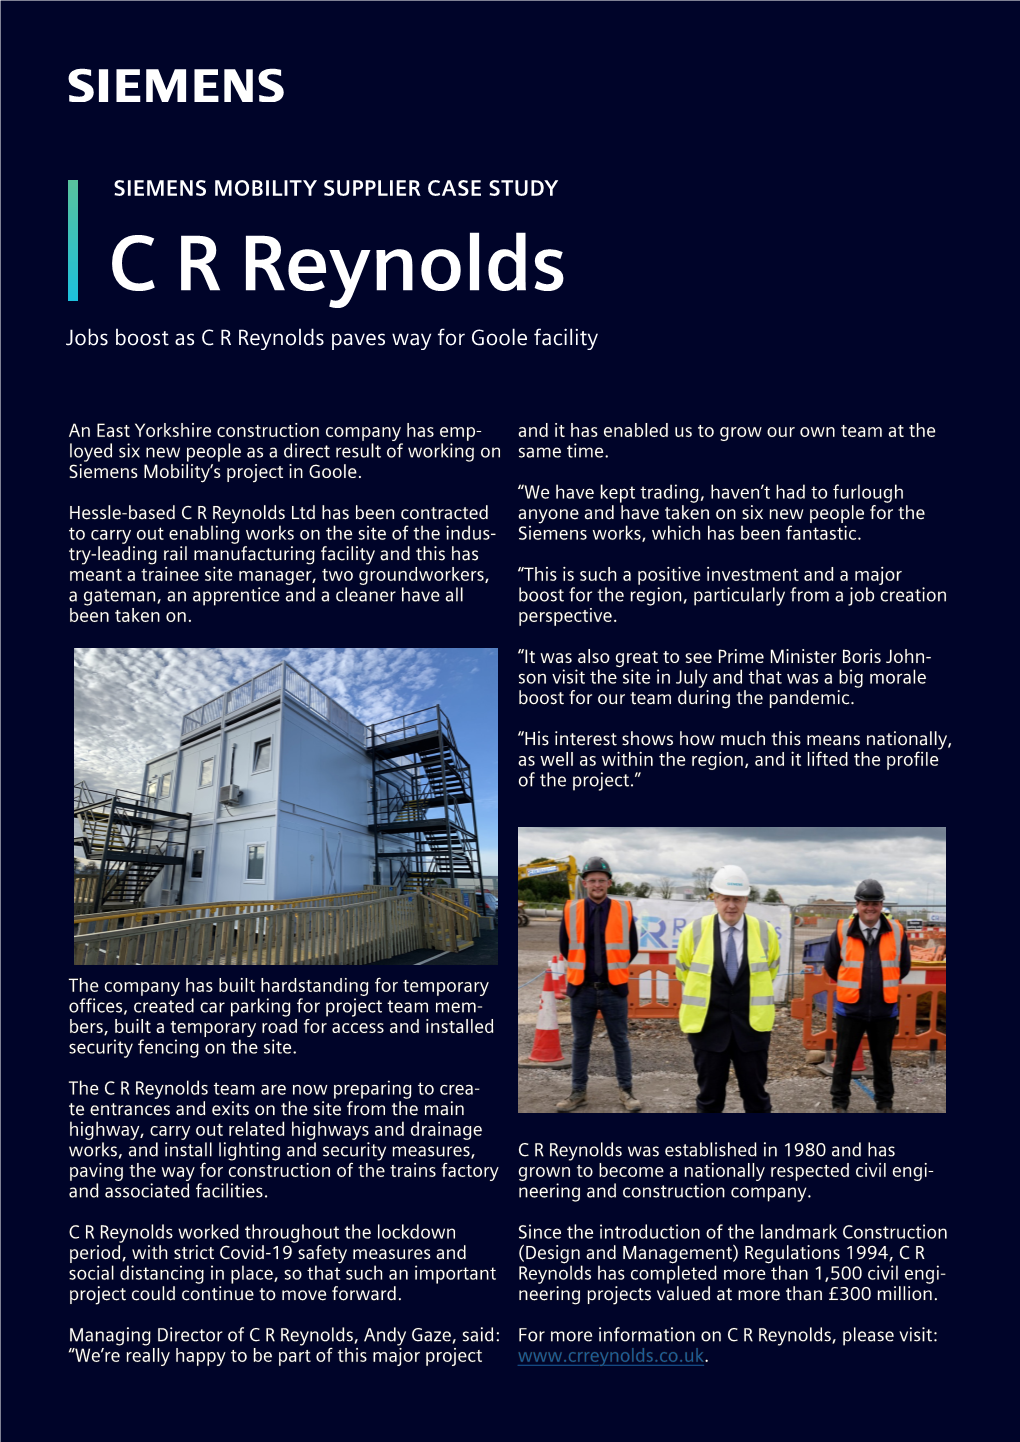 C R Reynolds Jobs Boost As C R Reynolds Paves Way for Goole Facility